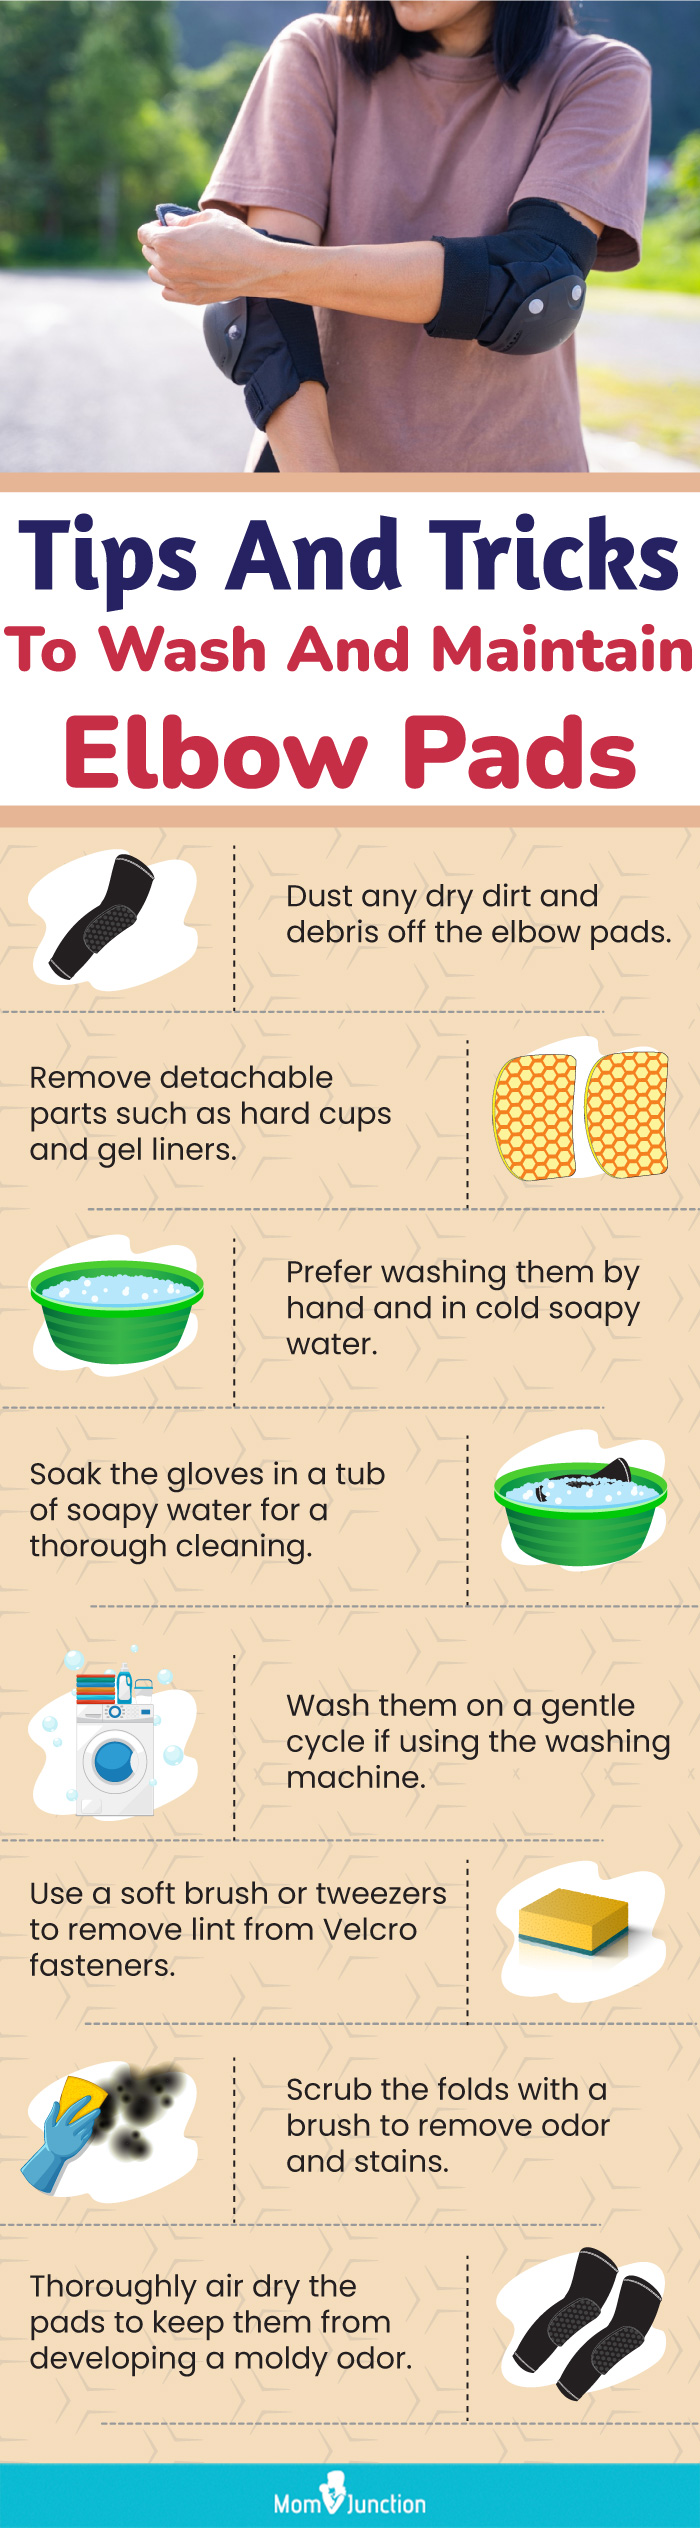 Tips And Tricks To Wash And Maintain Elbow Pads (infographic)